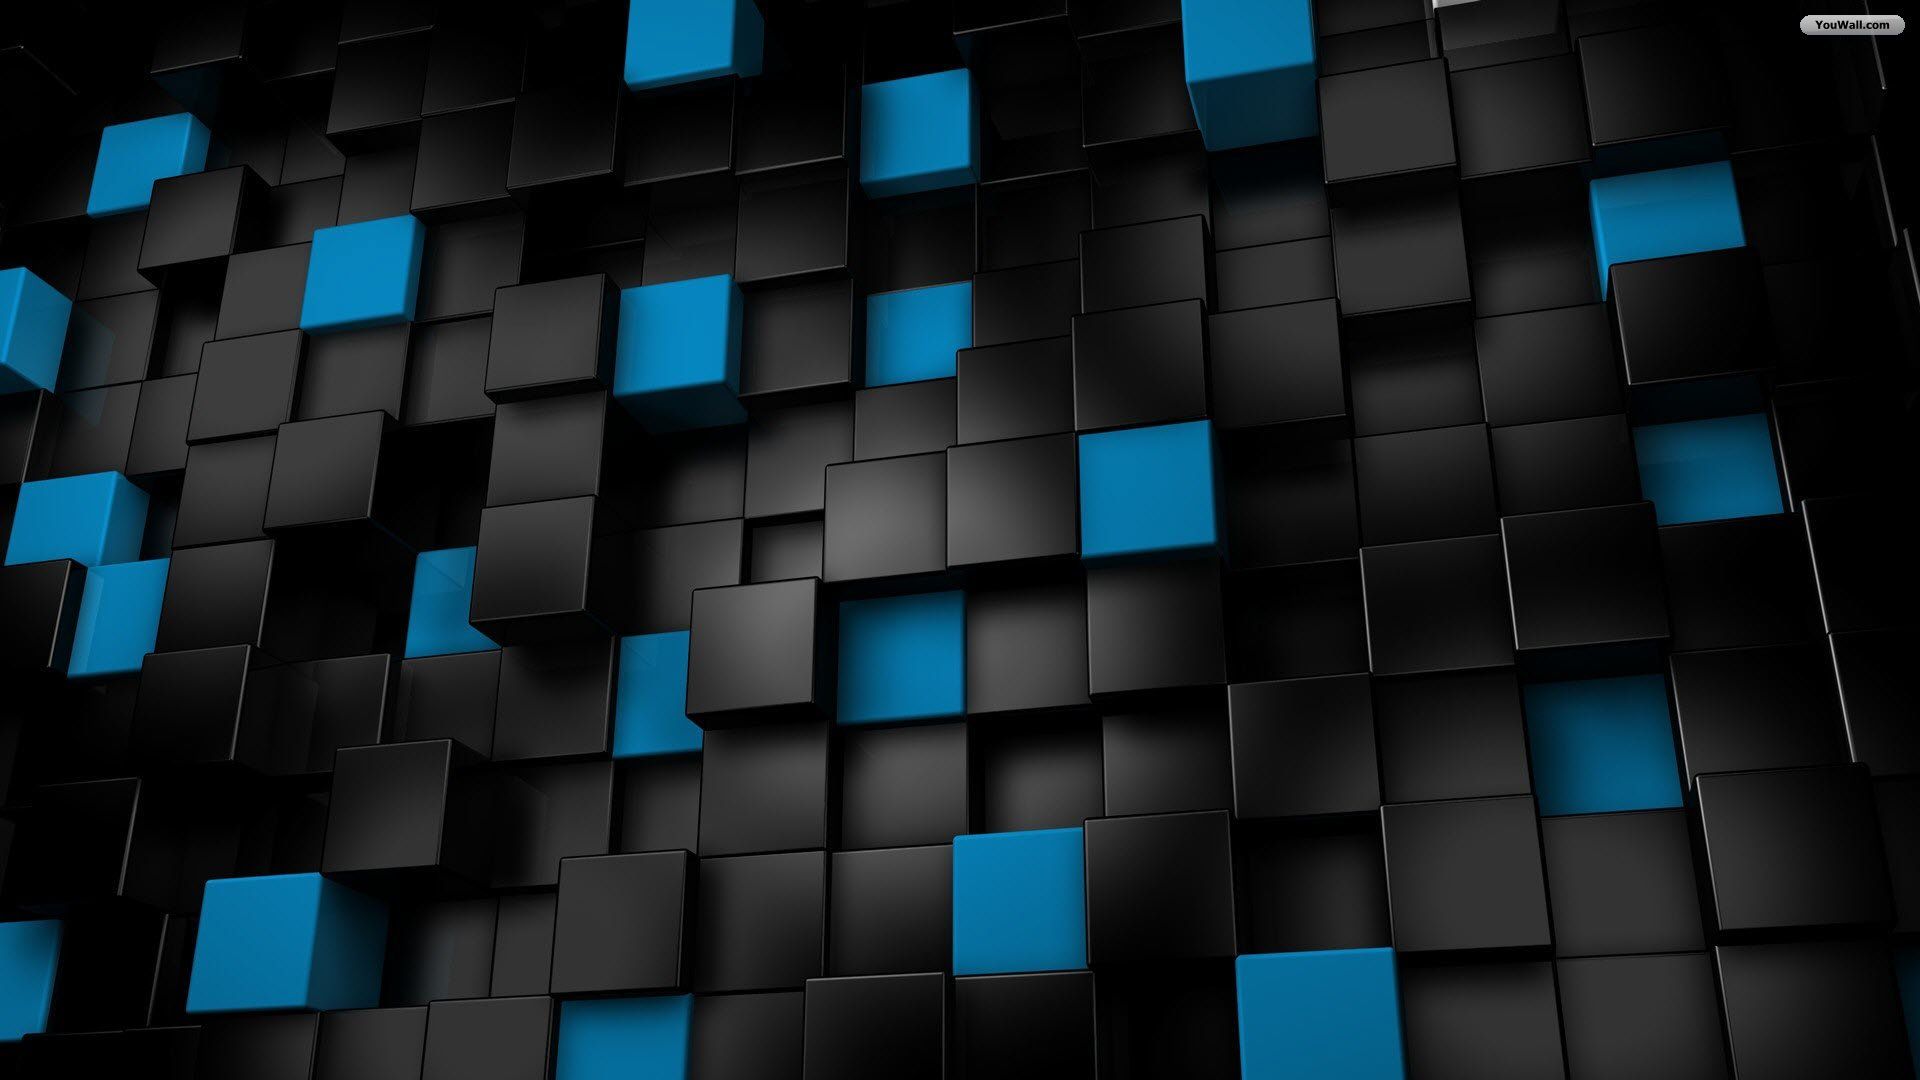 Download Black And Blue Cubes Wallpaper | Full HD Wallpapers